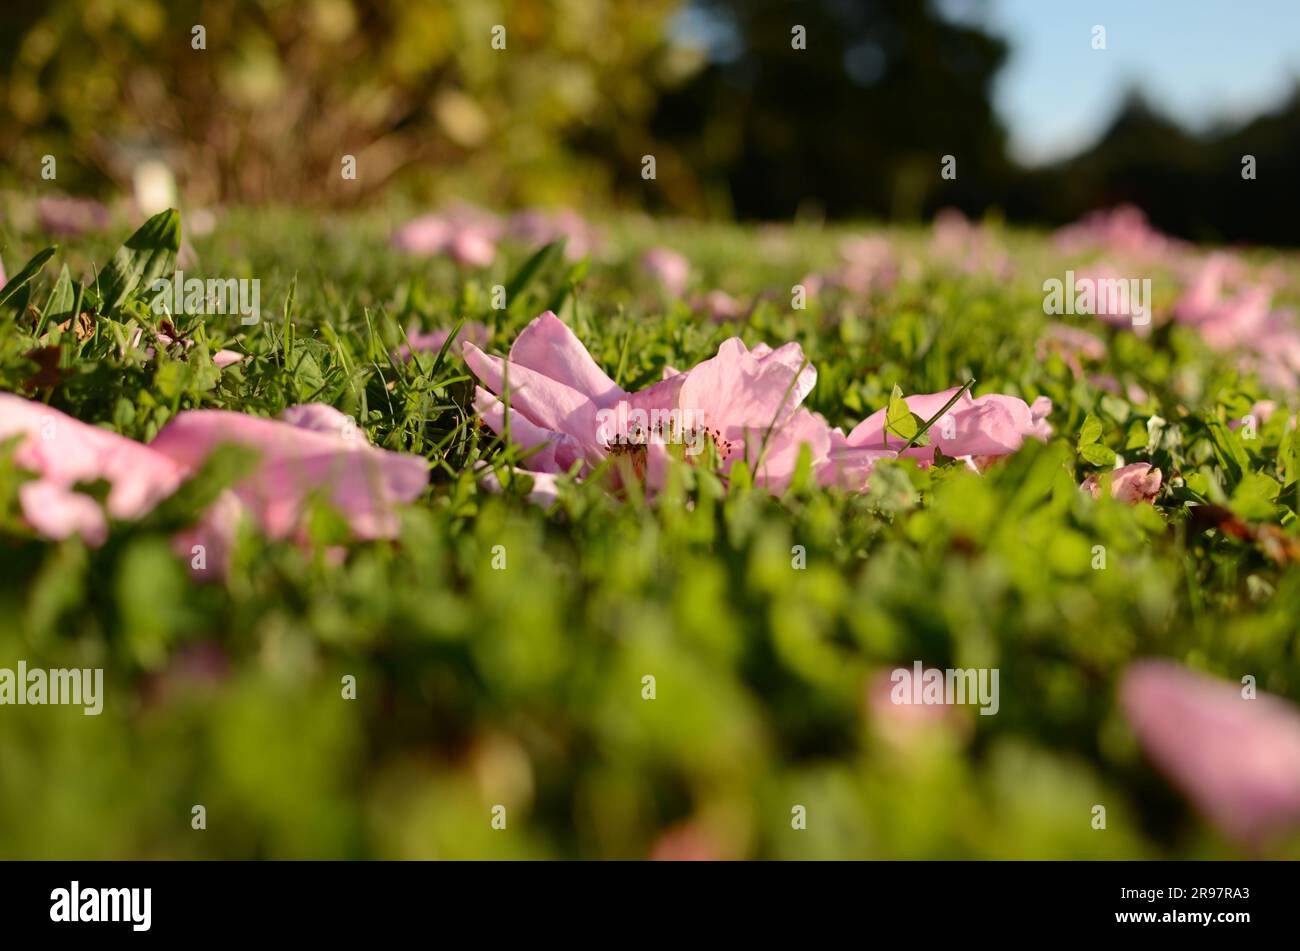 Pink Camellia Flowers On Lawn. Stock Photo